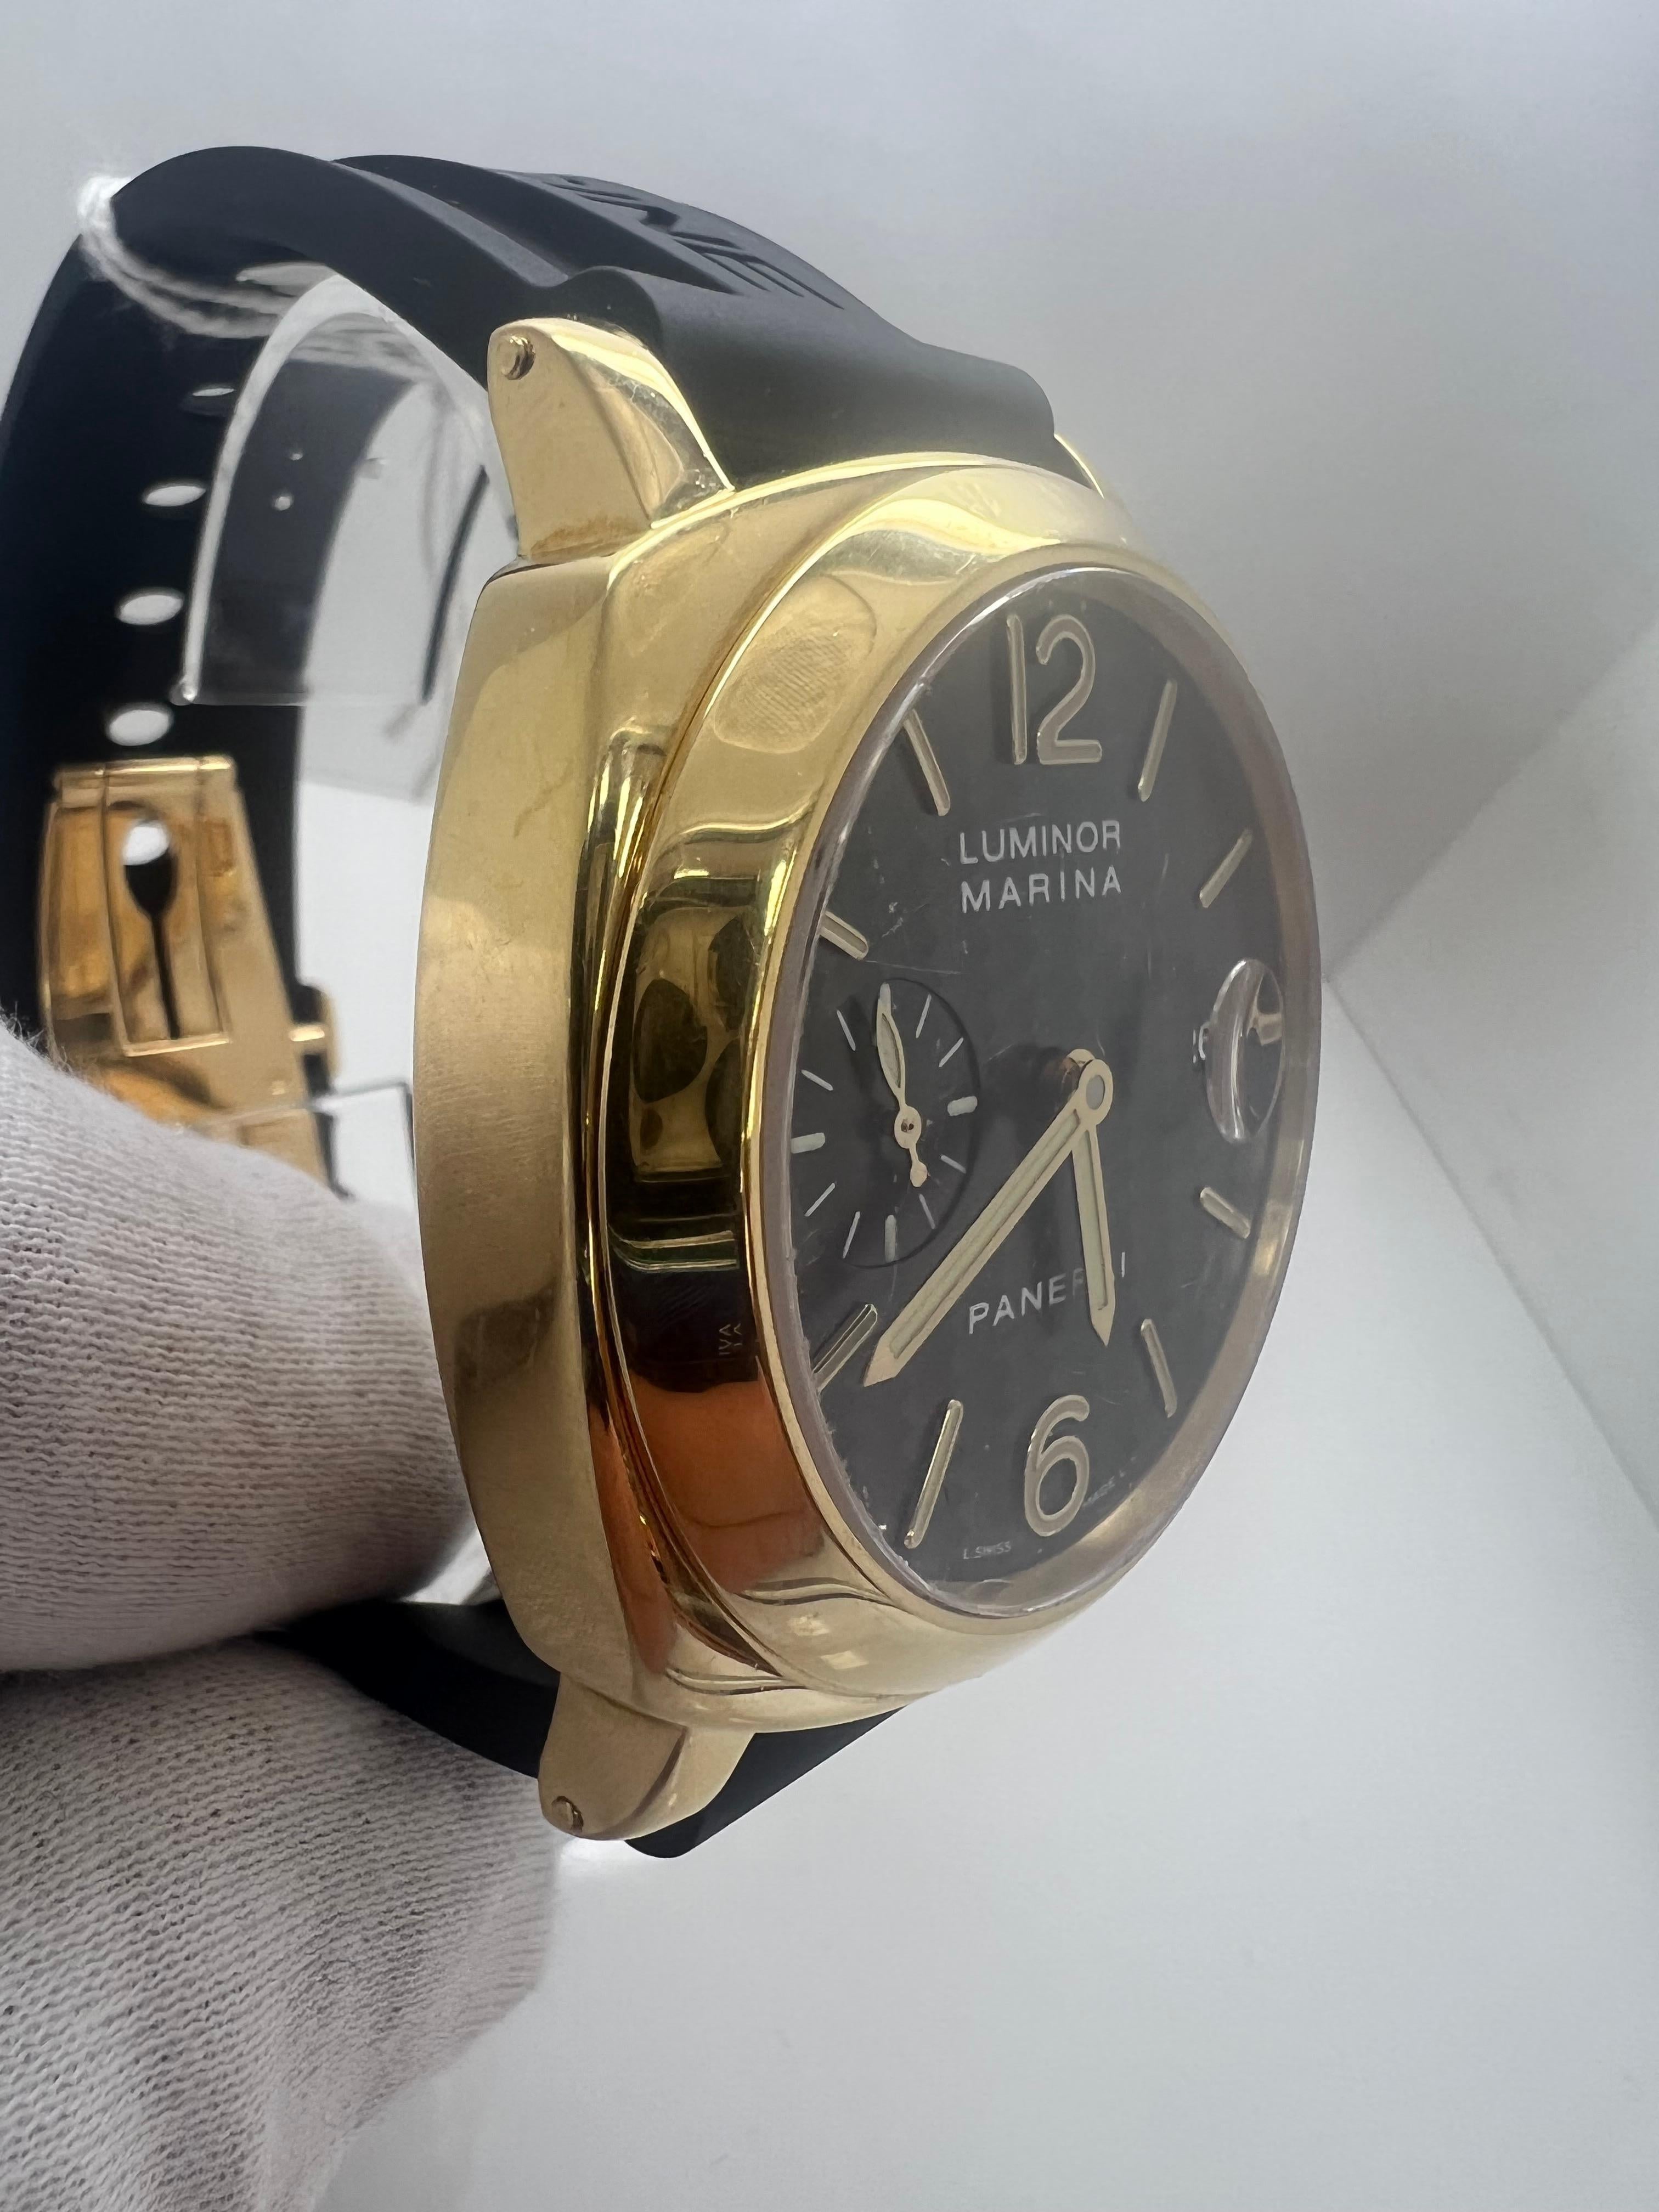 Panerai Luminor Marina Automatic 44mm Yellow Gold Mens Watch

excellent condition

all original parts

comes with originla box and paperwork

shop with confidence

